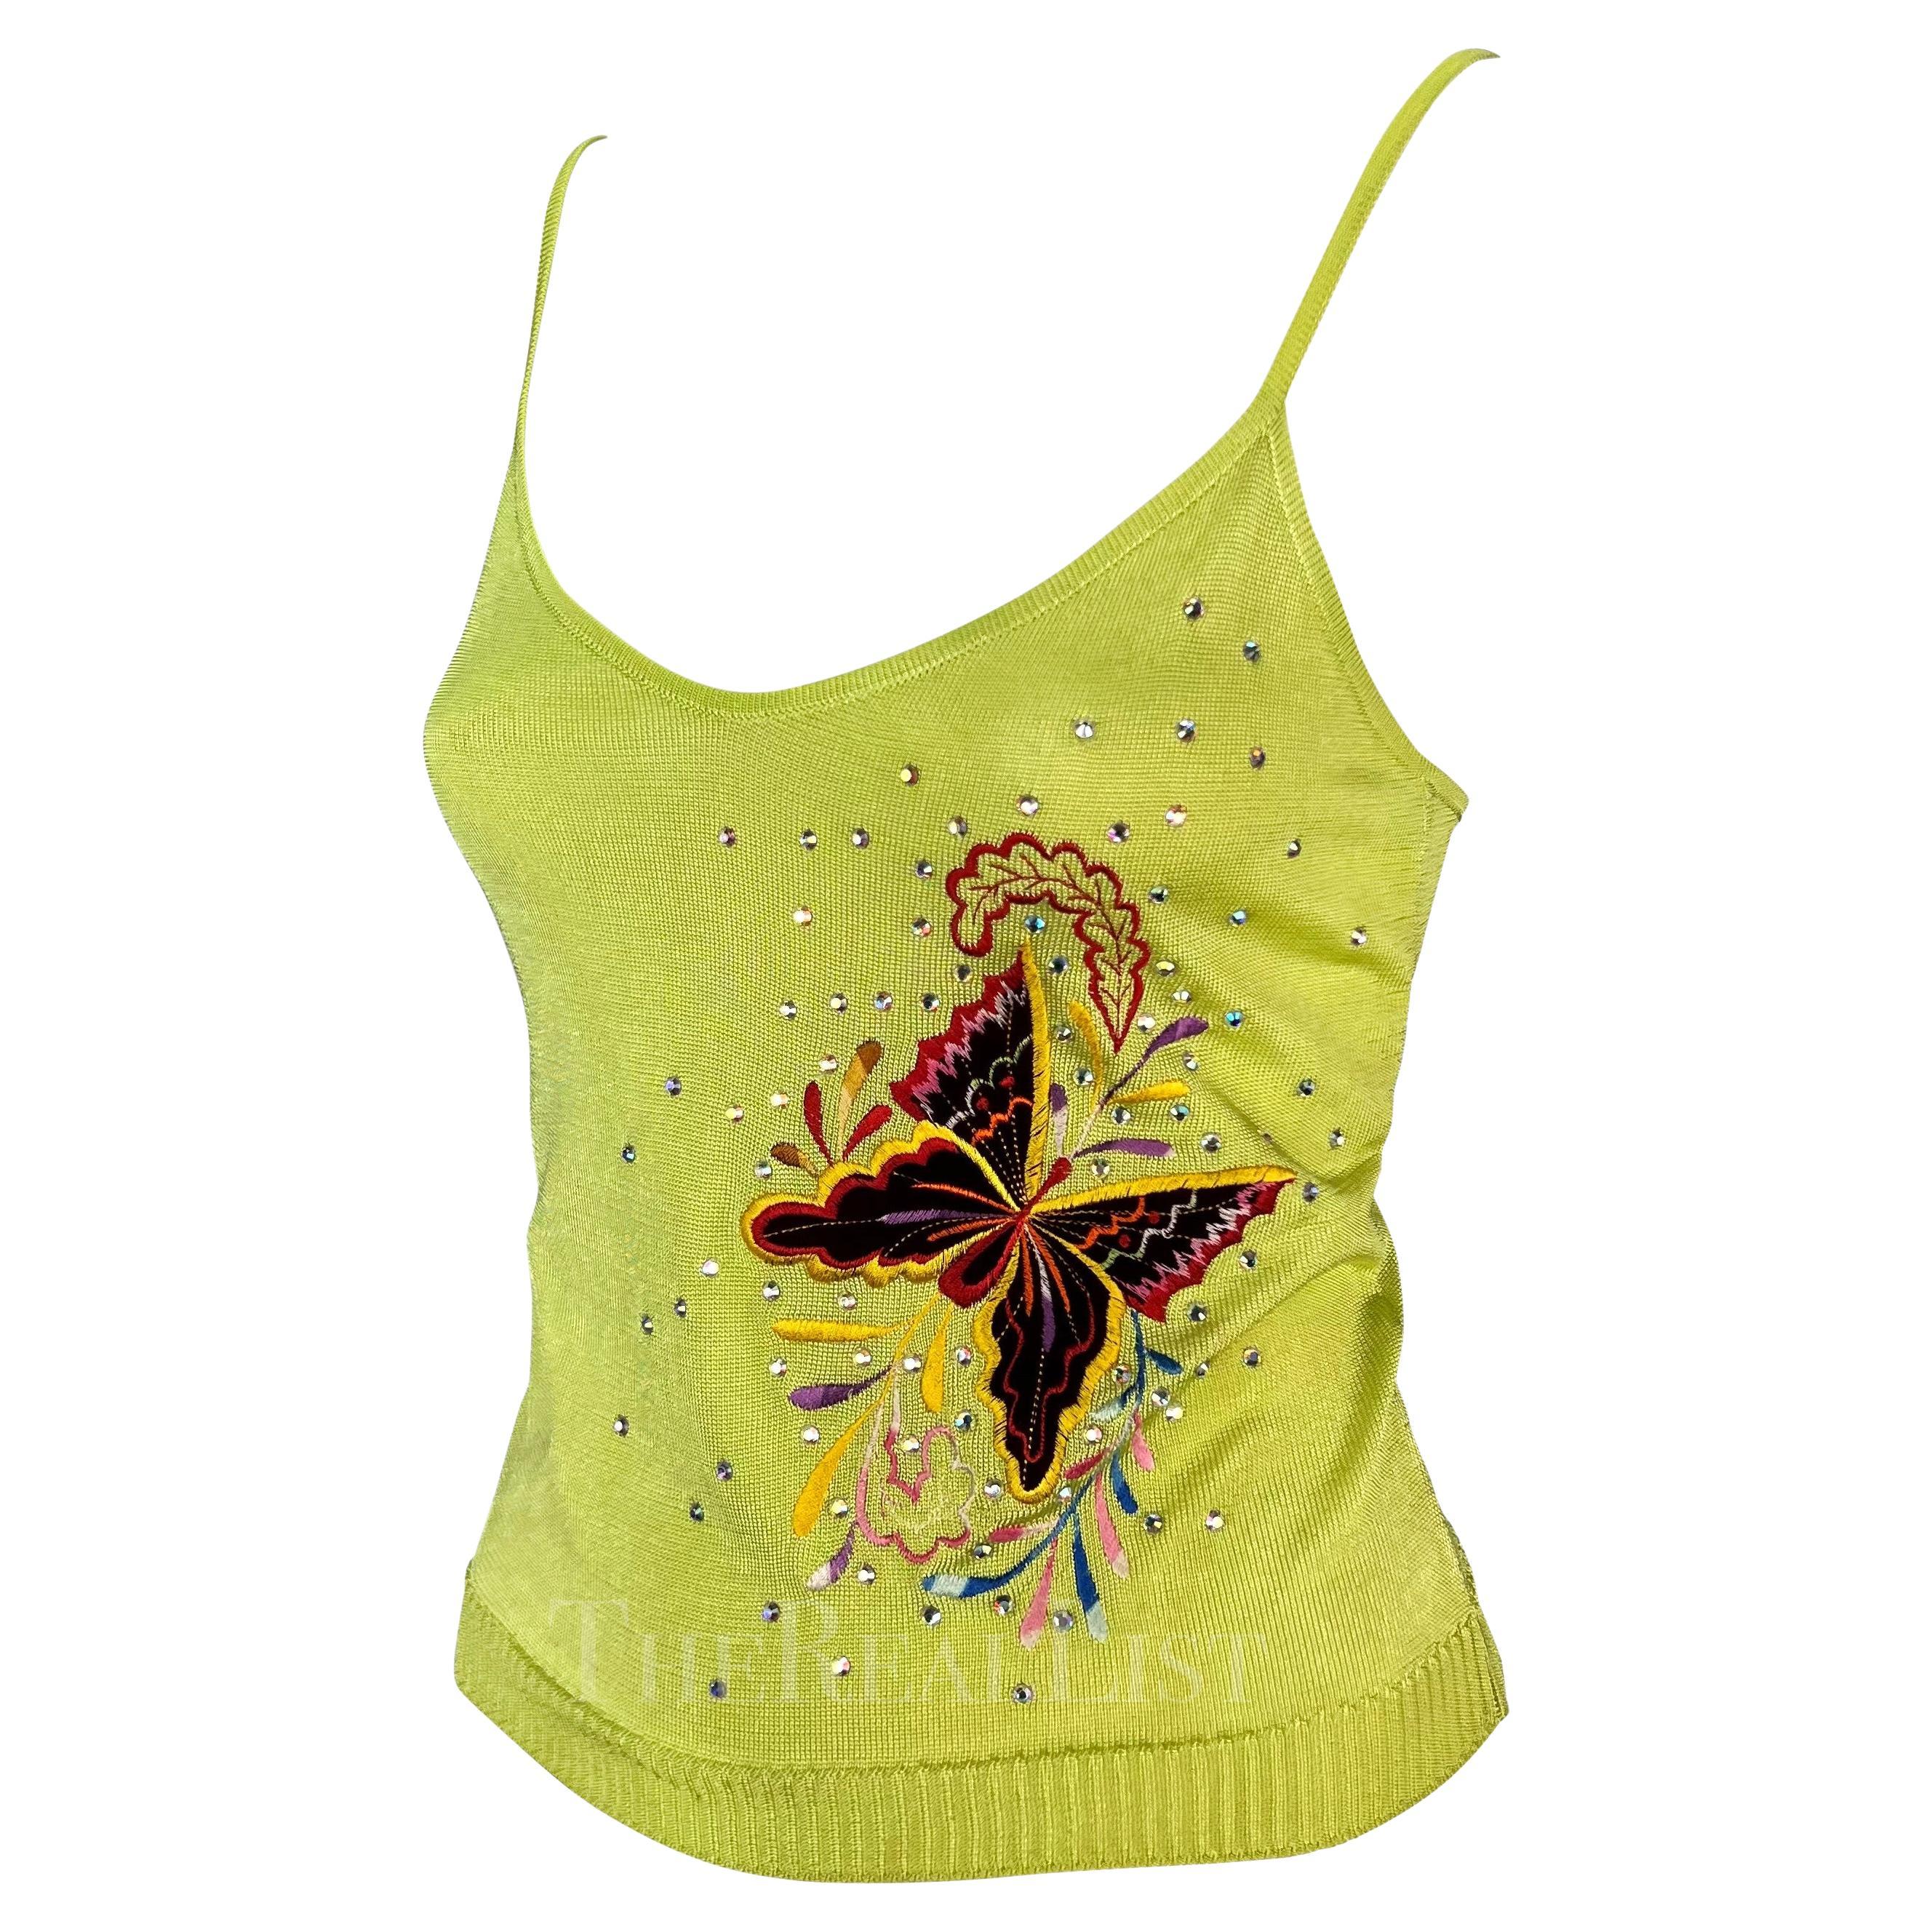 S/S 2002 Christian Dior by John Galliano for Butterfly Embellished Knit Tank Top 